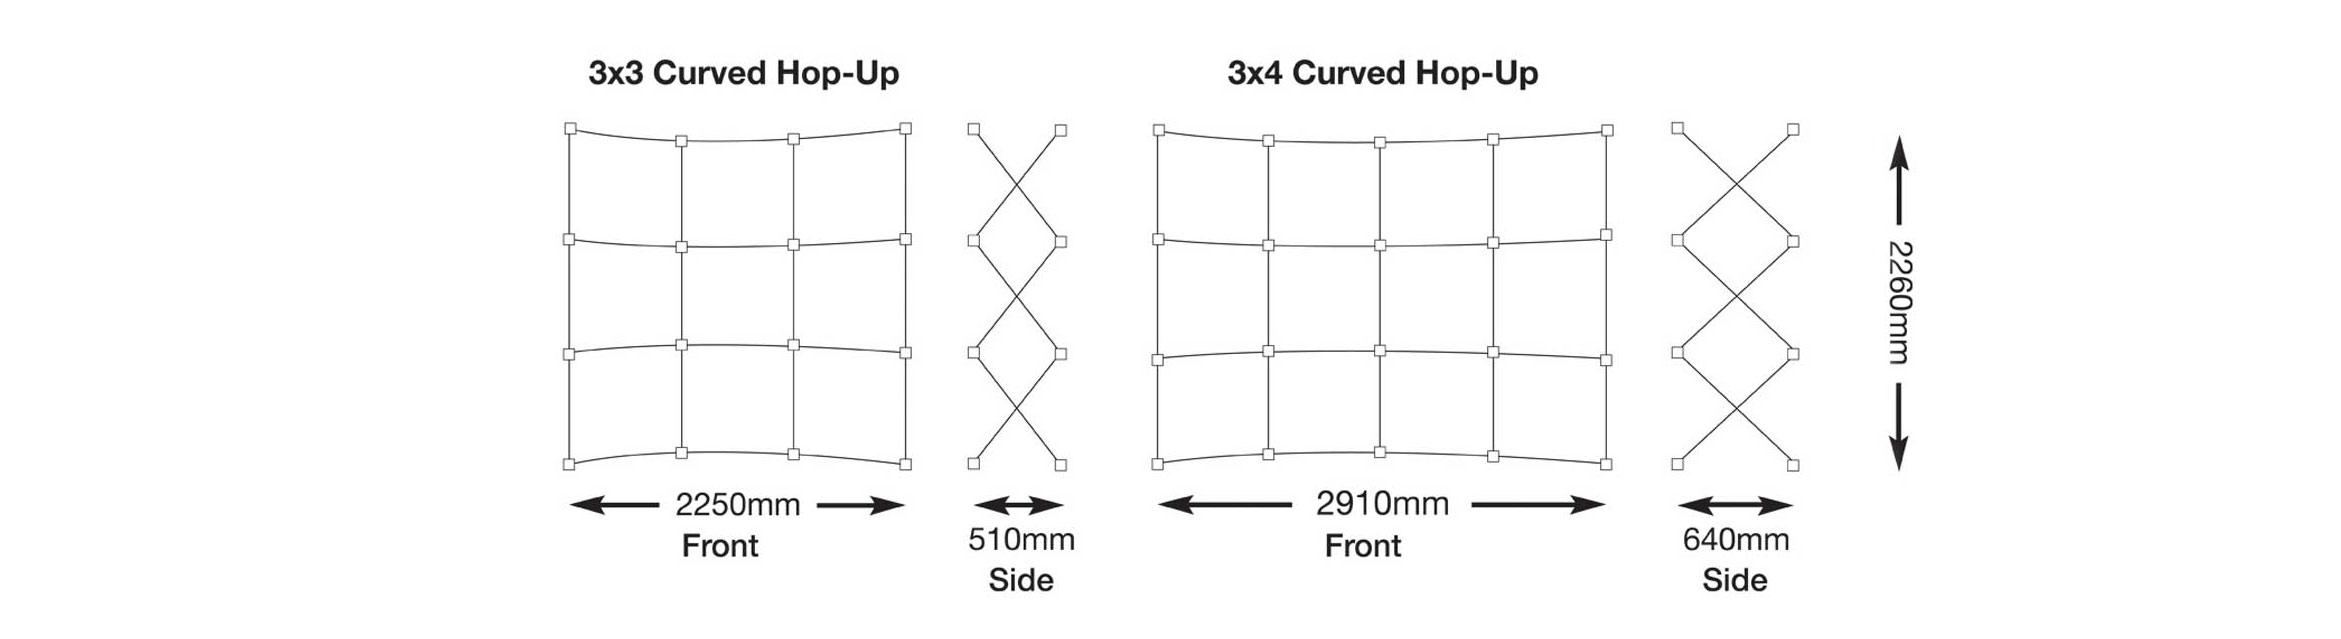 Curved Hopup Size